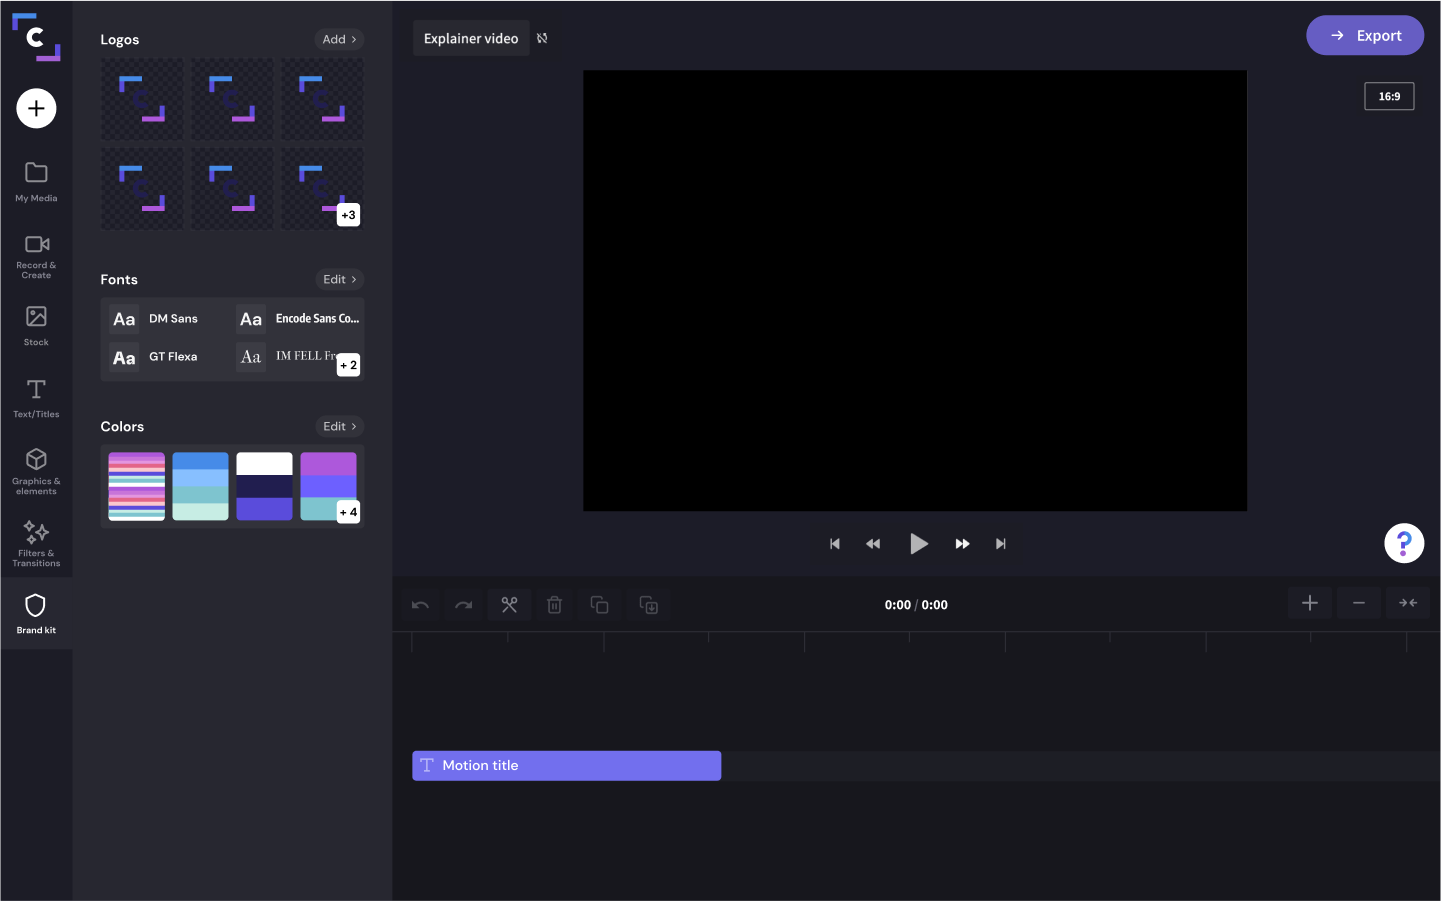 The brand kit tab open in the Clipchamp video editor.